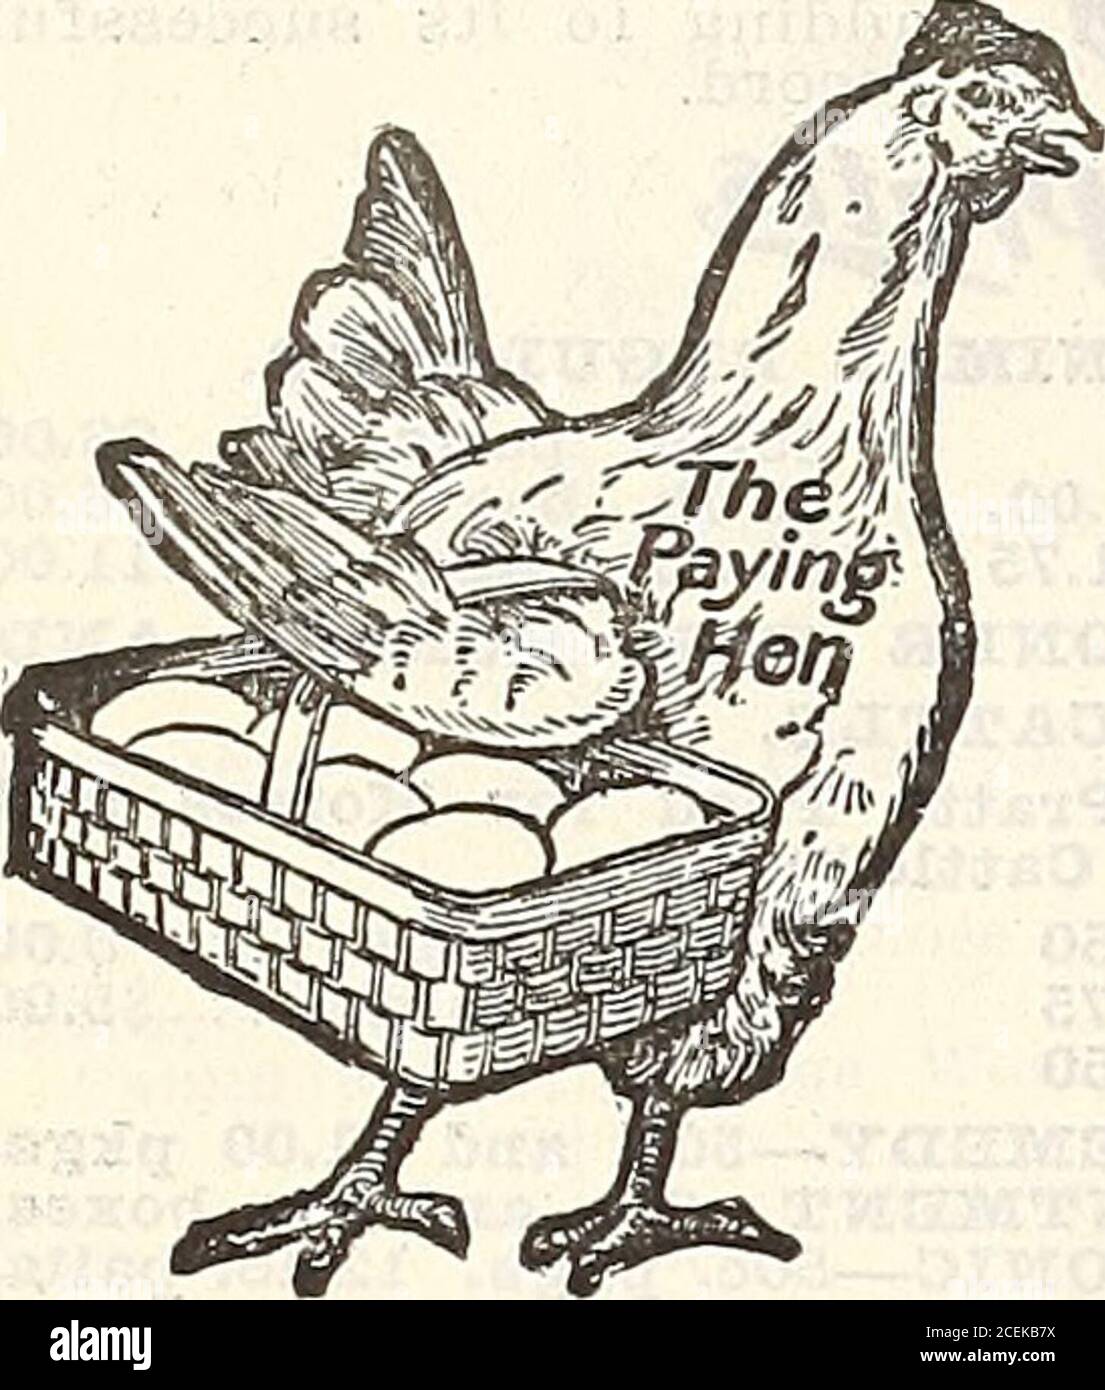 . 1916 Griffith and Turner Co. : farm and garden supplies. Prescfipiions of Dr. Hess (Itl £?., D. V, S.) D R.HESS POULTRYPAN-A-CE-A makes poultry healthy; makeshens lay; not a stimulant, buta tonic, that tones up the dor-mant egg organs, brings backthe scratch and cackle, andcompels each hen to put hershare of eggs in the marketbasket. It also contains internal antiseptics thatcounteract disease; insures a healthy, singingpoultry flock. Cost but a trifle—a pennysworth enough for 30 hens per day. 1 J/2 lbs.,25c.; 5 lbs.. 60c.; 12 lbs., $1.25; 25-lb.pail, $2.50. GUARANTEED.. Stock Photo